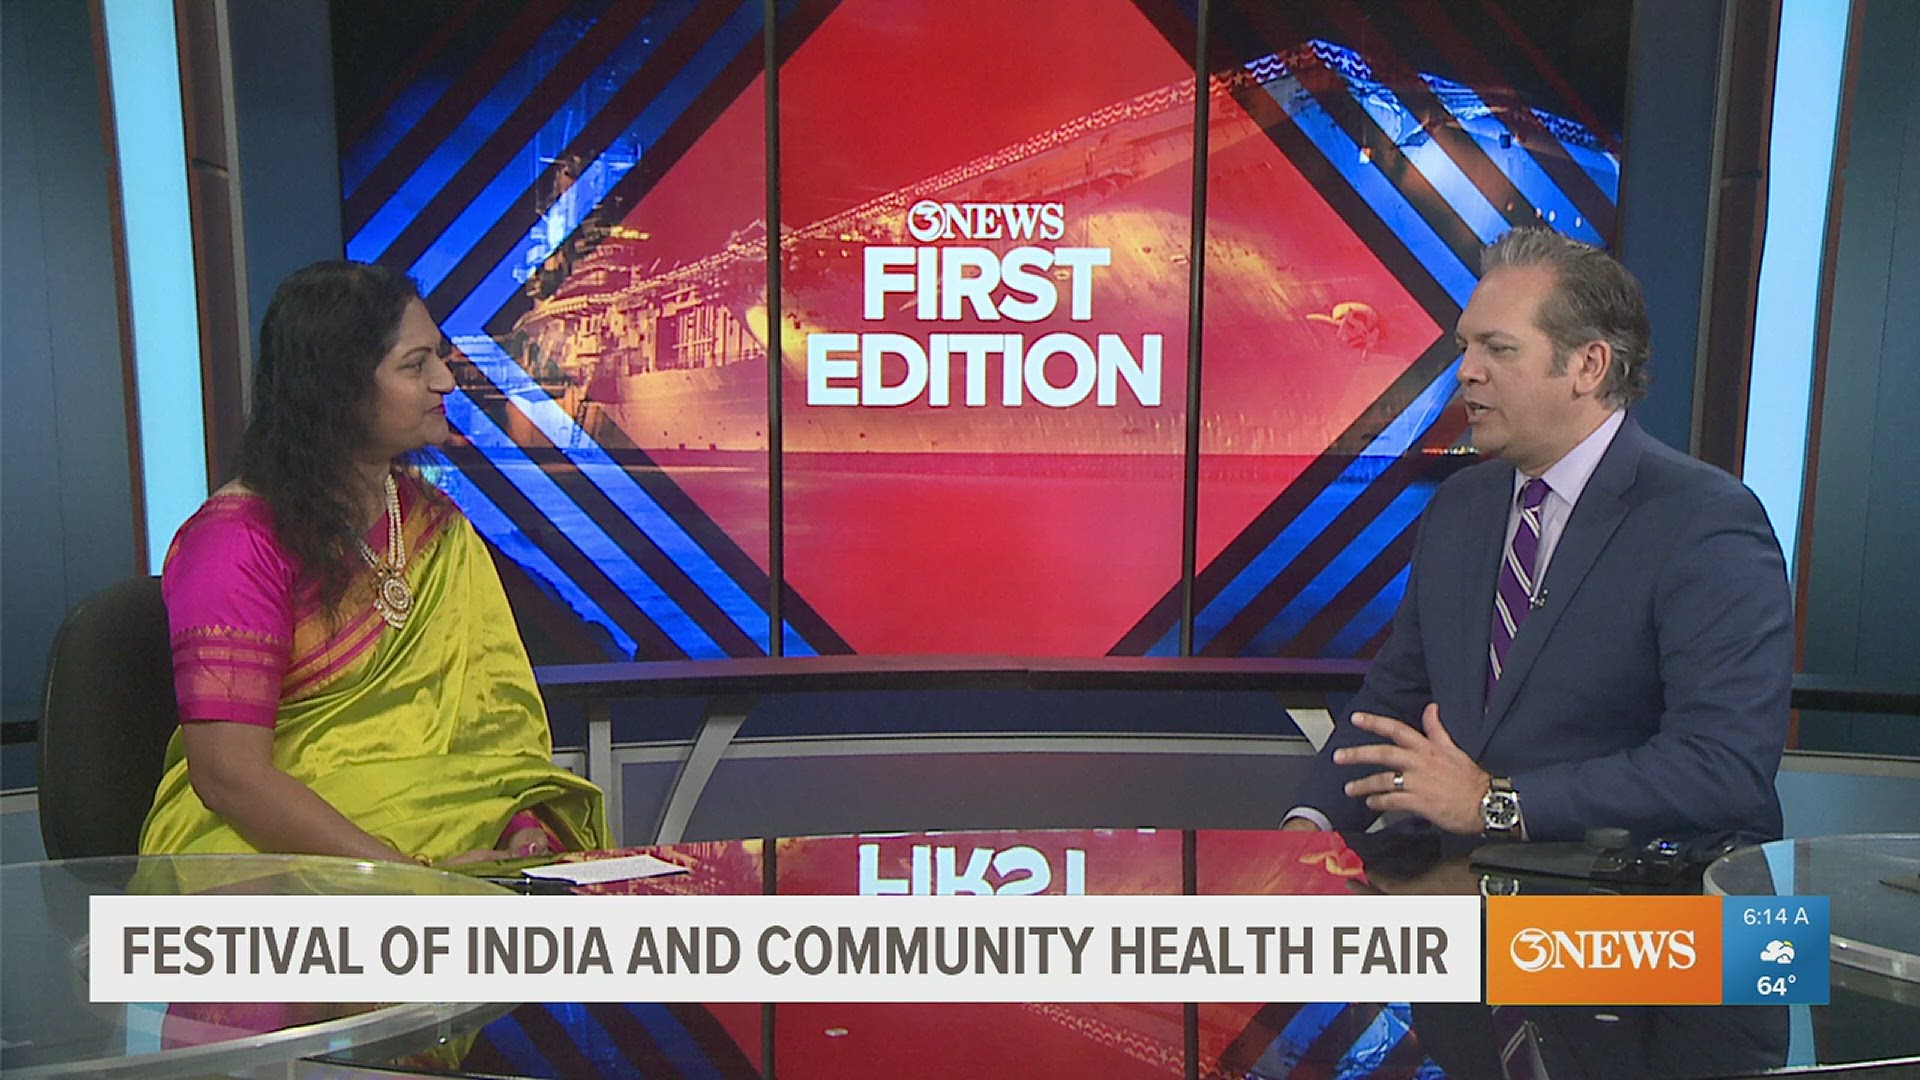 Ritha Kulkarni of the Festival of India joined us on First Edition to let the public know what to expect at this year's cultural festival and health fair.